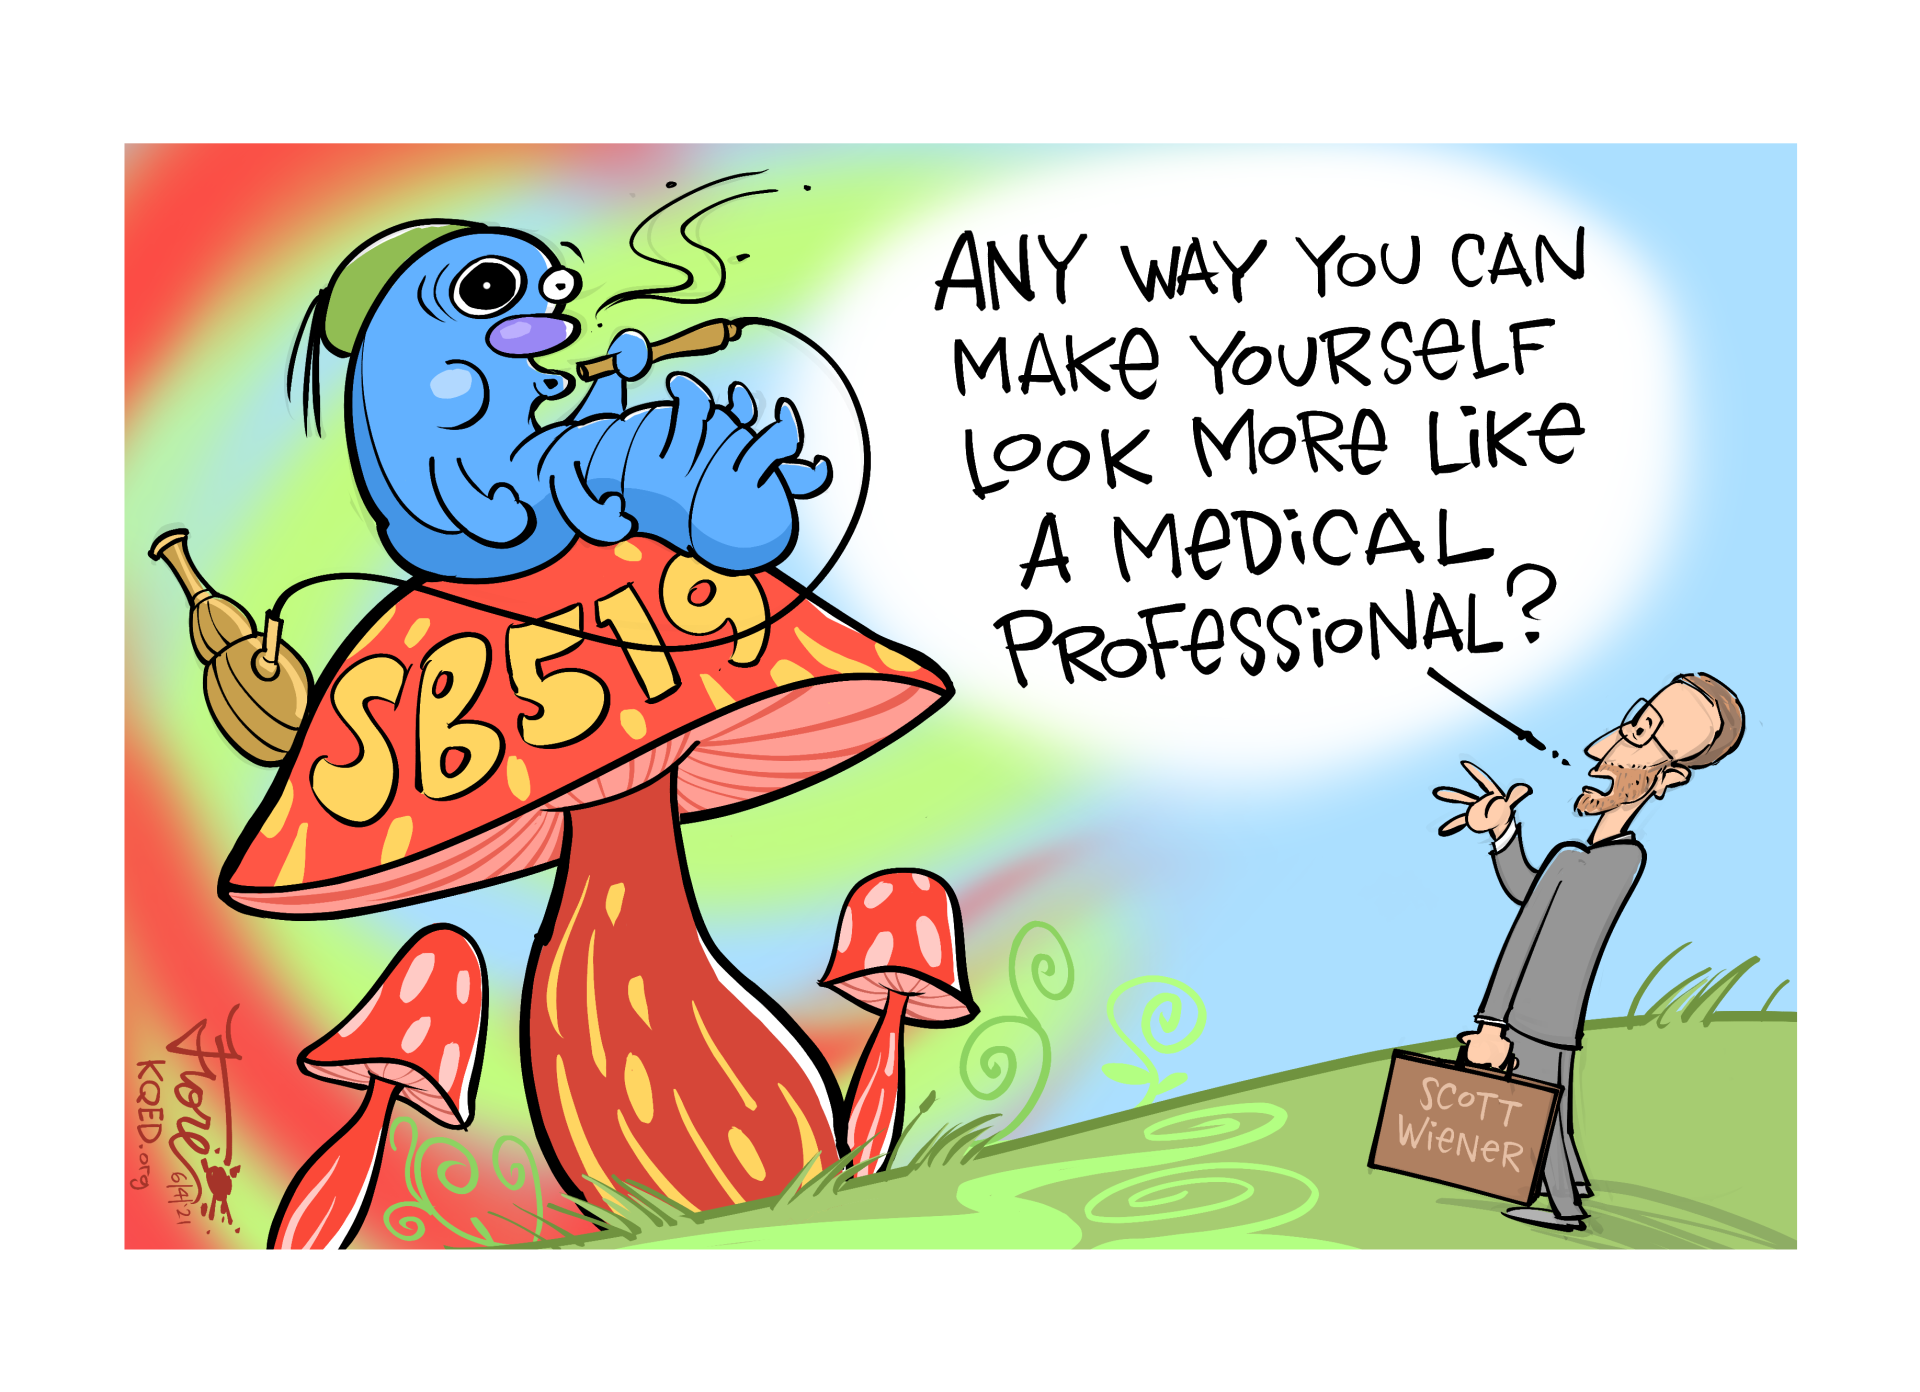 A Mark Fiore cartoon about state Sen. Scott Wiener's bill that would decriminalize psychedelics. The cartoon shows the caterpillar from Alice in Wonderland atop a mushroom labeled "SB 519" as Wiener says, "any way you can make yourself look more like a medical professional?"